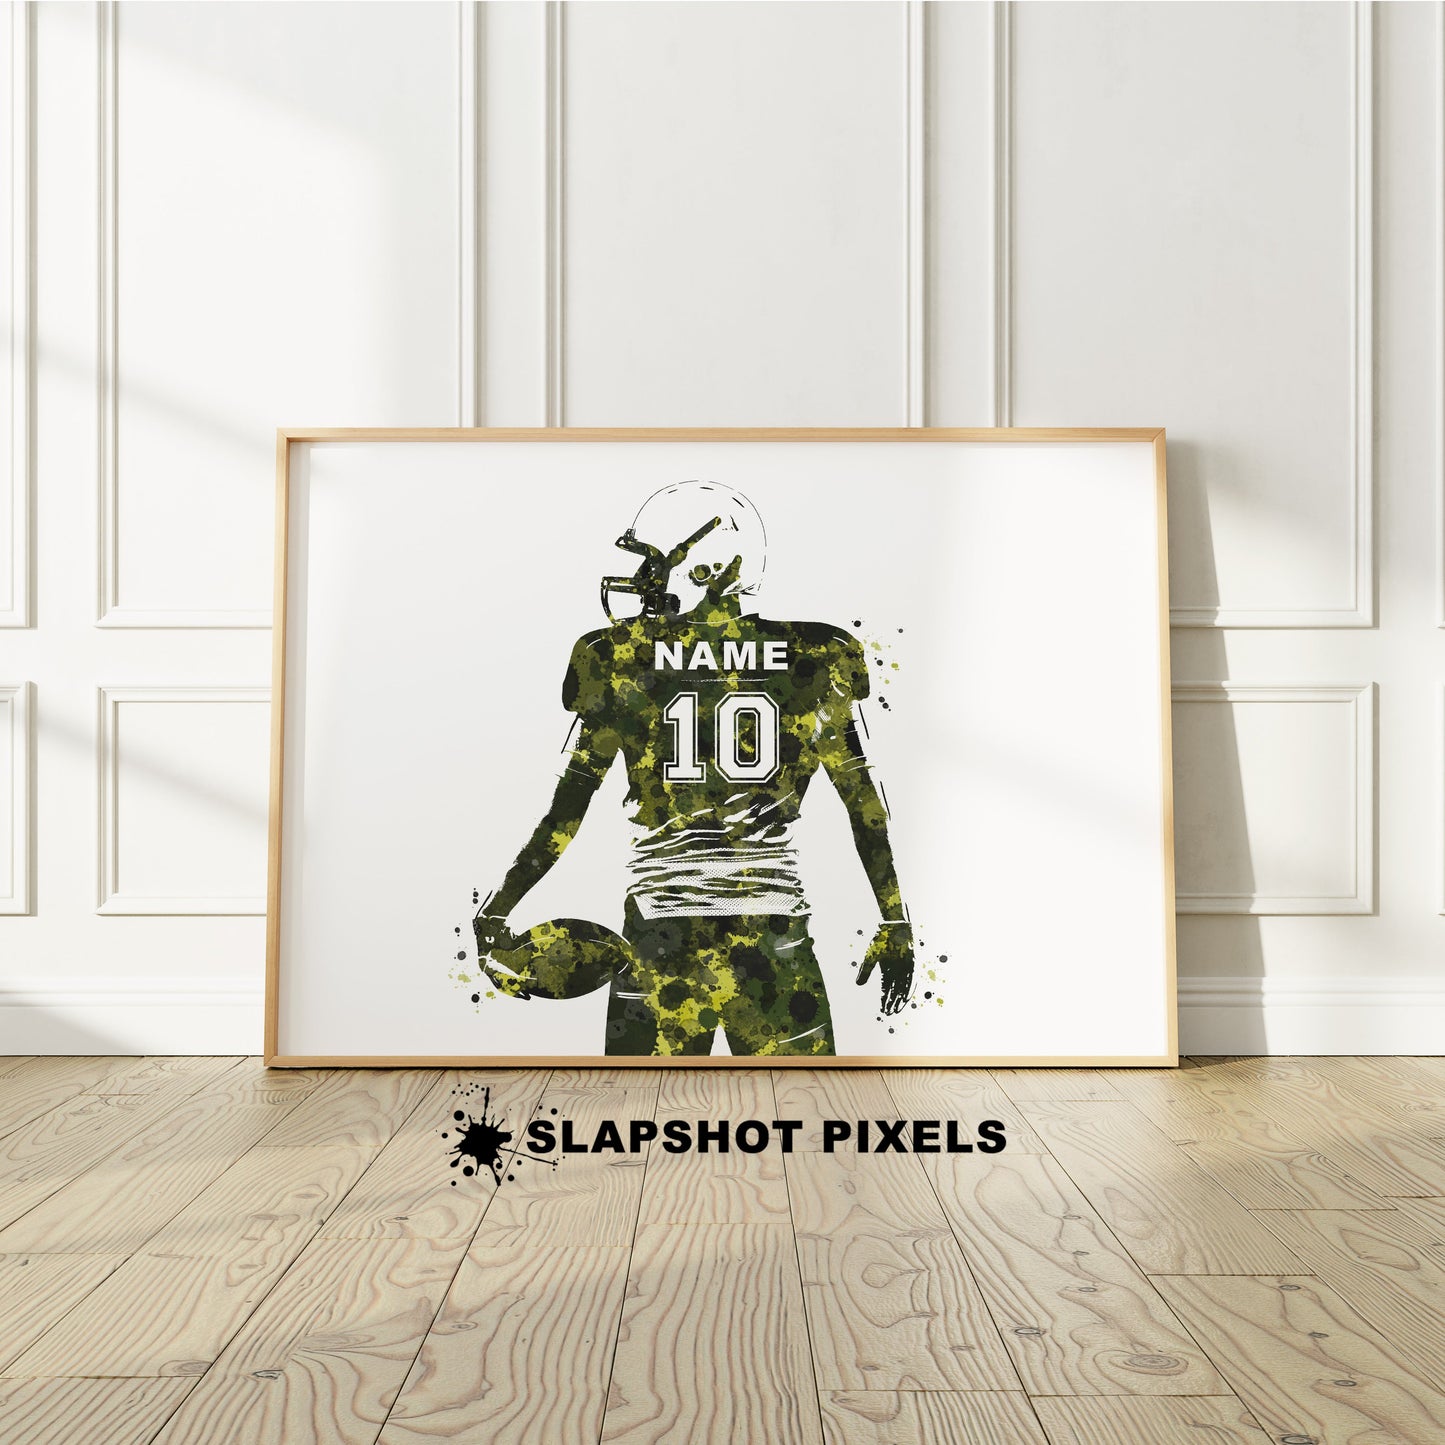 Personalized boy football poster showing back of a football player from the waist up holding a football with custom name and number on the football jersey. Designed in watercolor splatters. Perfect football gifts for boys, football goalie prints, football team gifts, football coach gift, football wall art décor in a football bedroom and birthday gifts for football players.